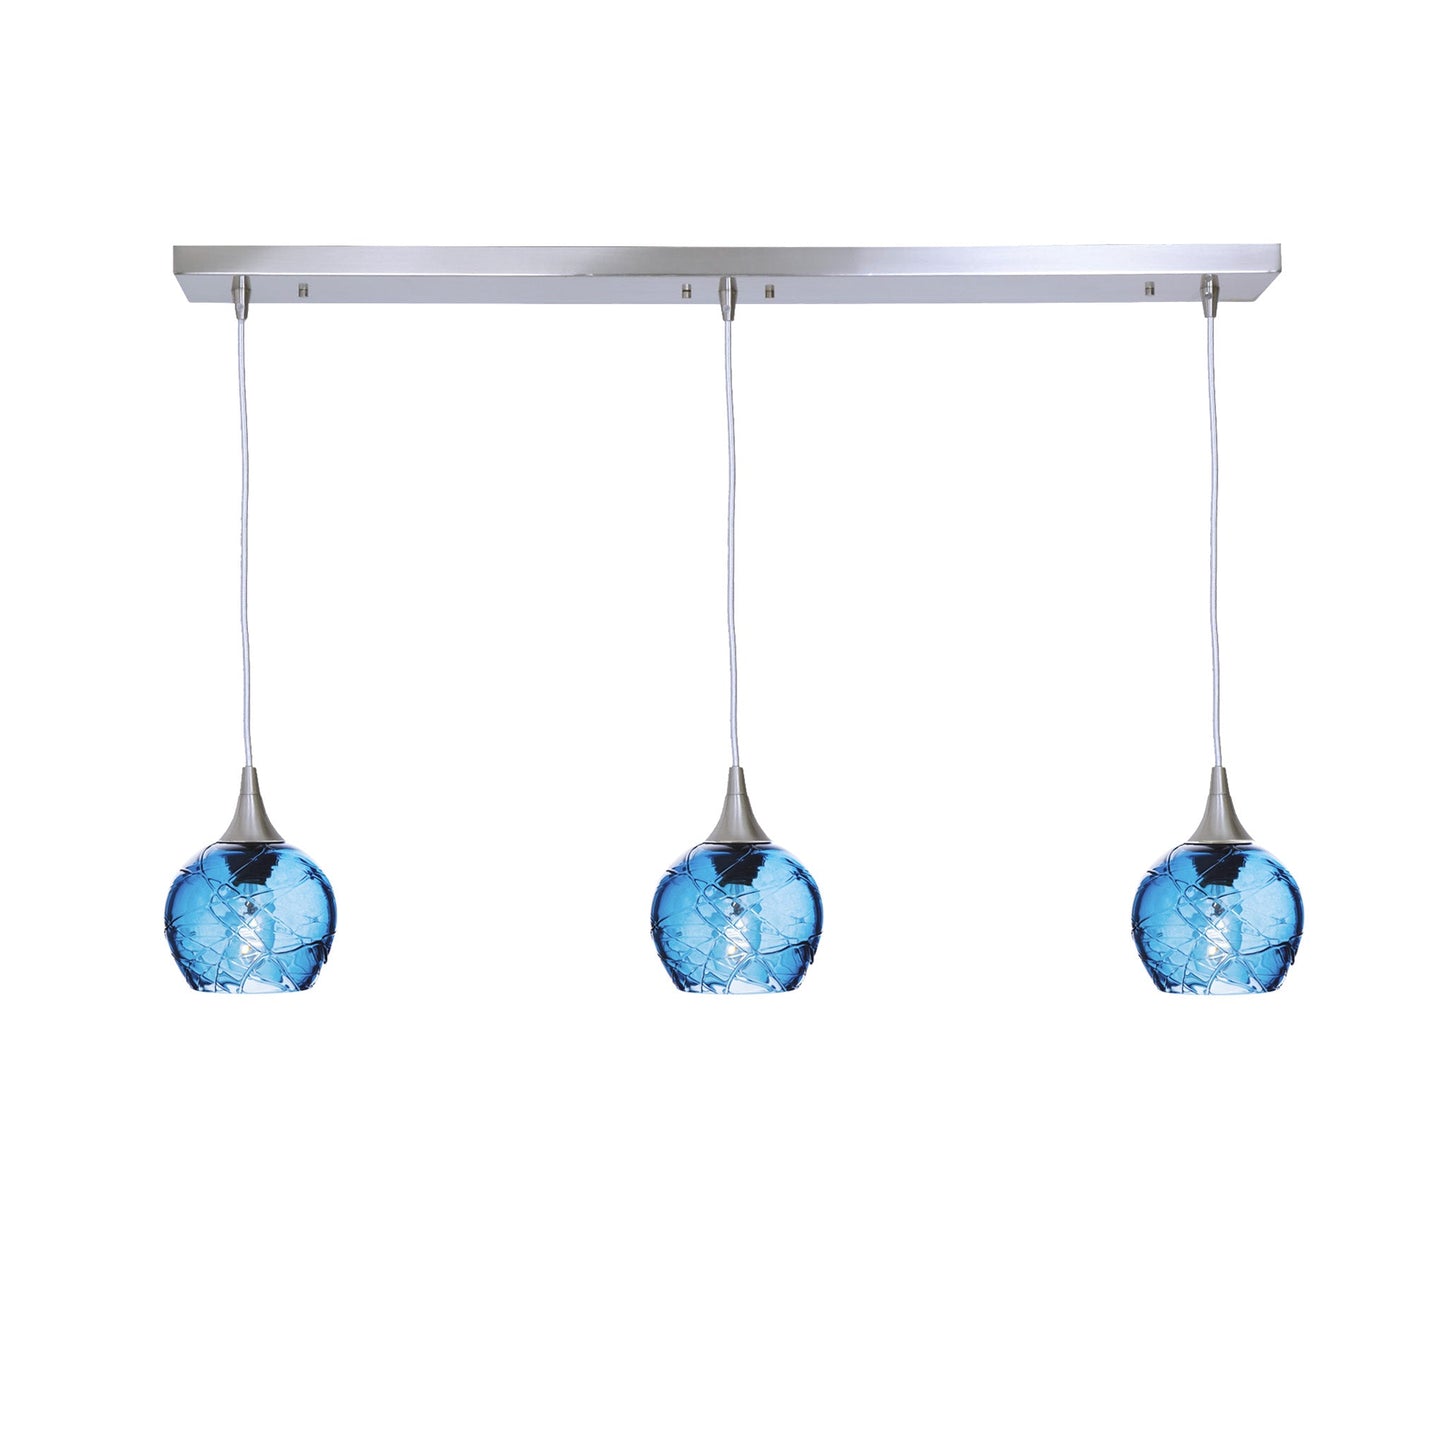 763 Spun: 3 Pendant Linear Chandelier-Glass-Bicycle Glass Co - Hotshop-Steel Blue-Brushed Nickel-Bicycle Glass Co